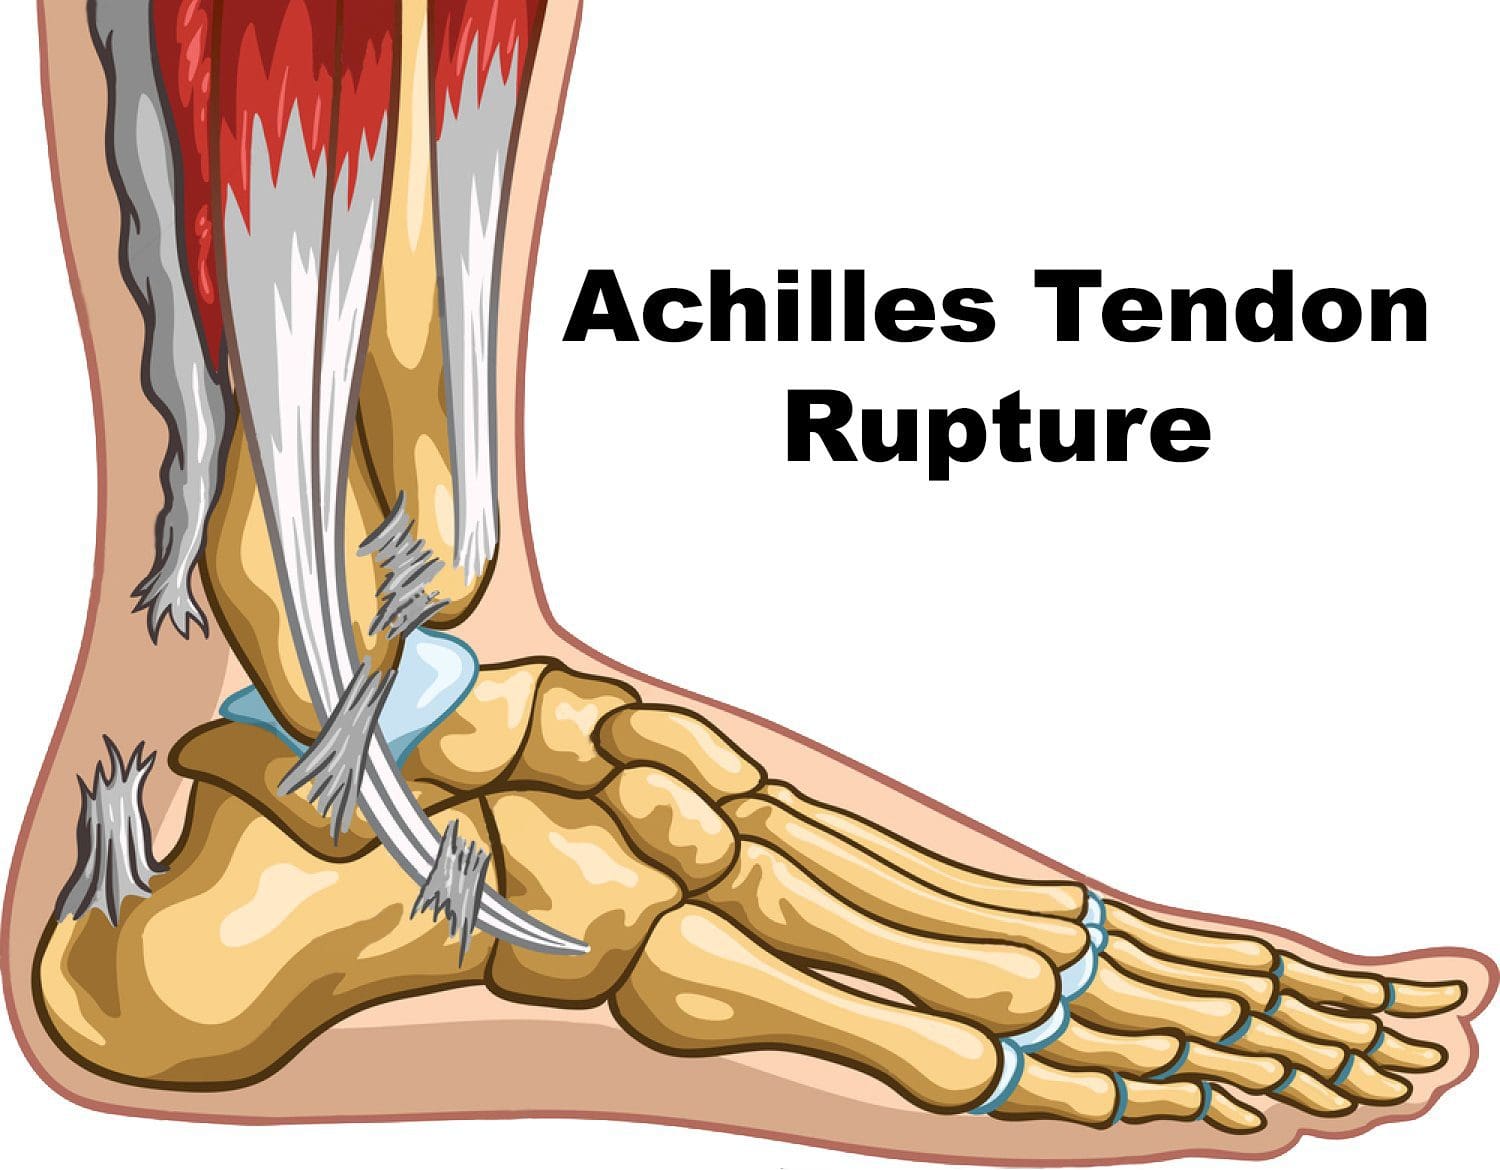 11860 Vista Del Sol, Ste. 128 Achilles Tendon Rupture, Likely Caused by Calf Injury